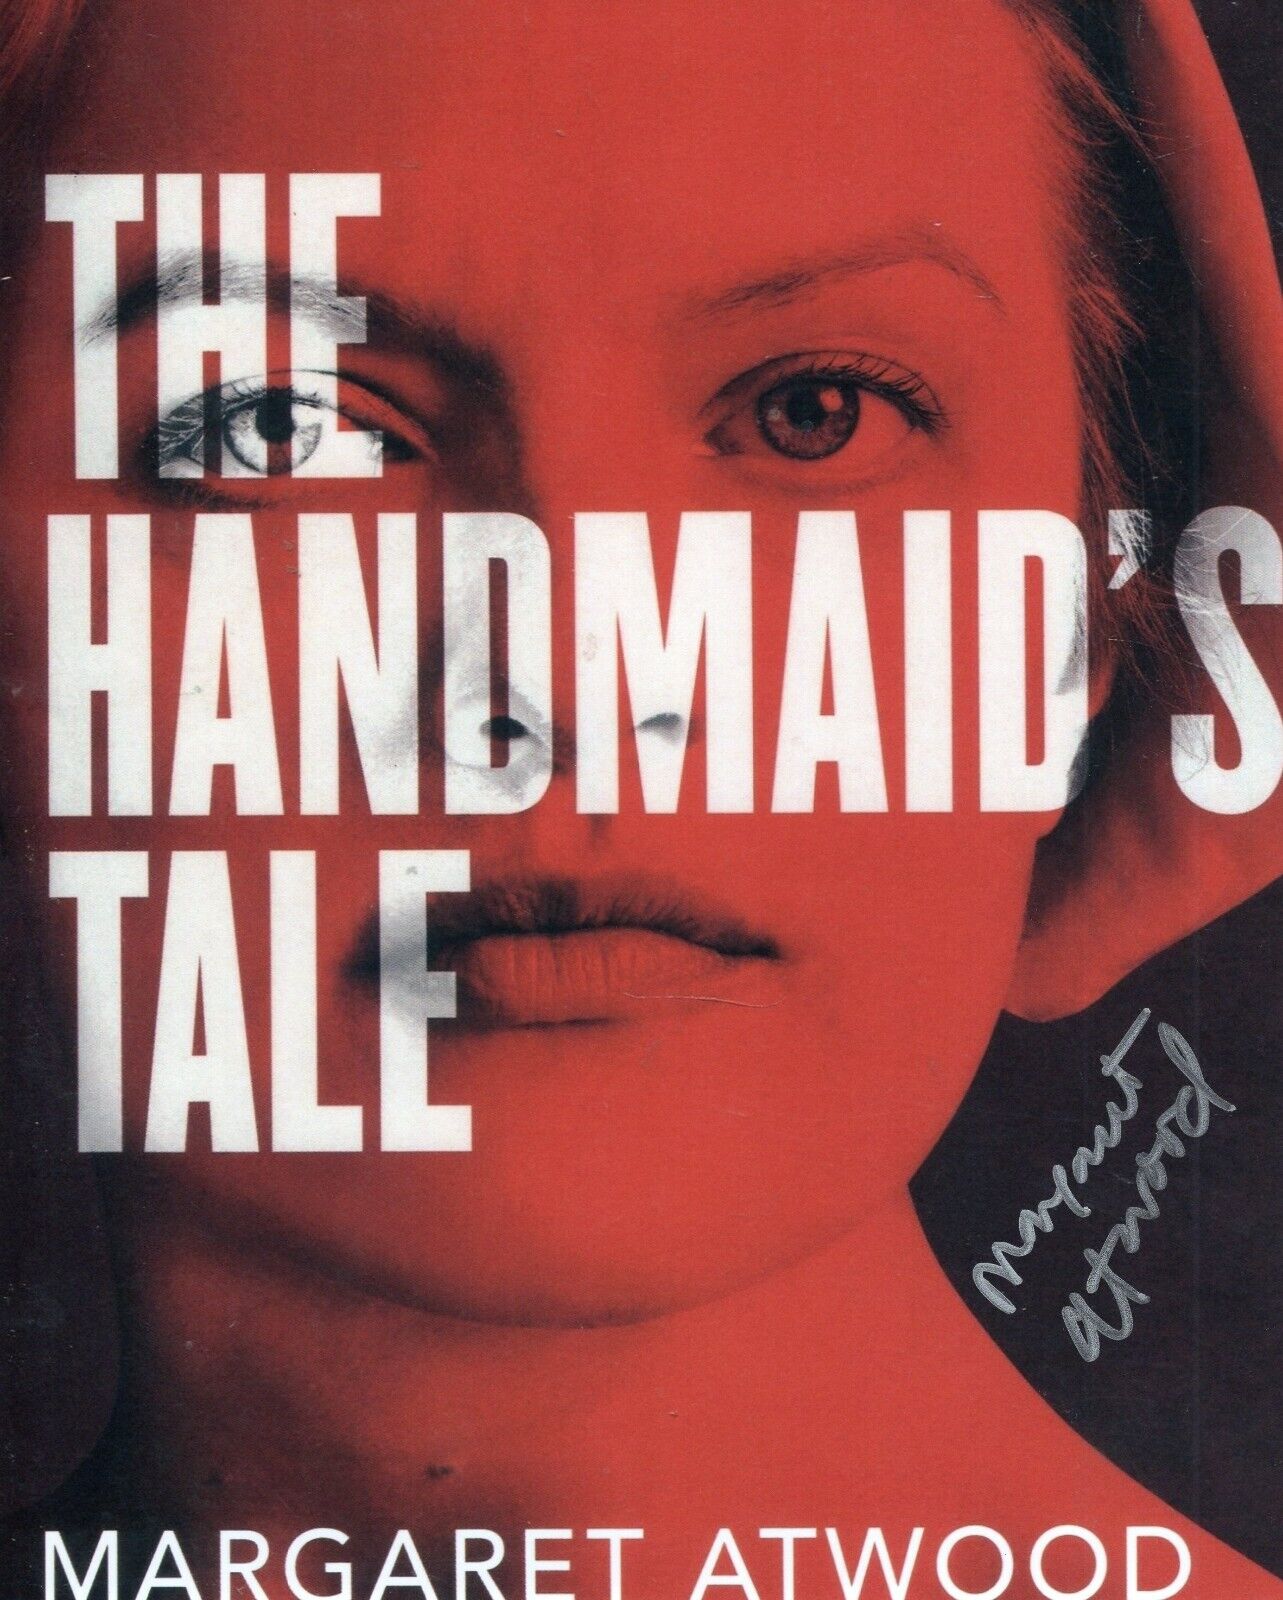 Margaret Atwood signed The Handmaid's Tale 8x10 photo  autographed proof #2